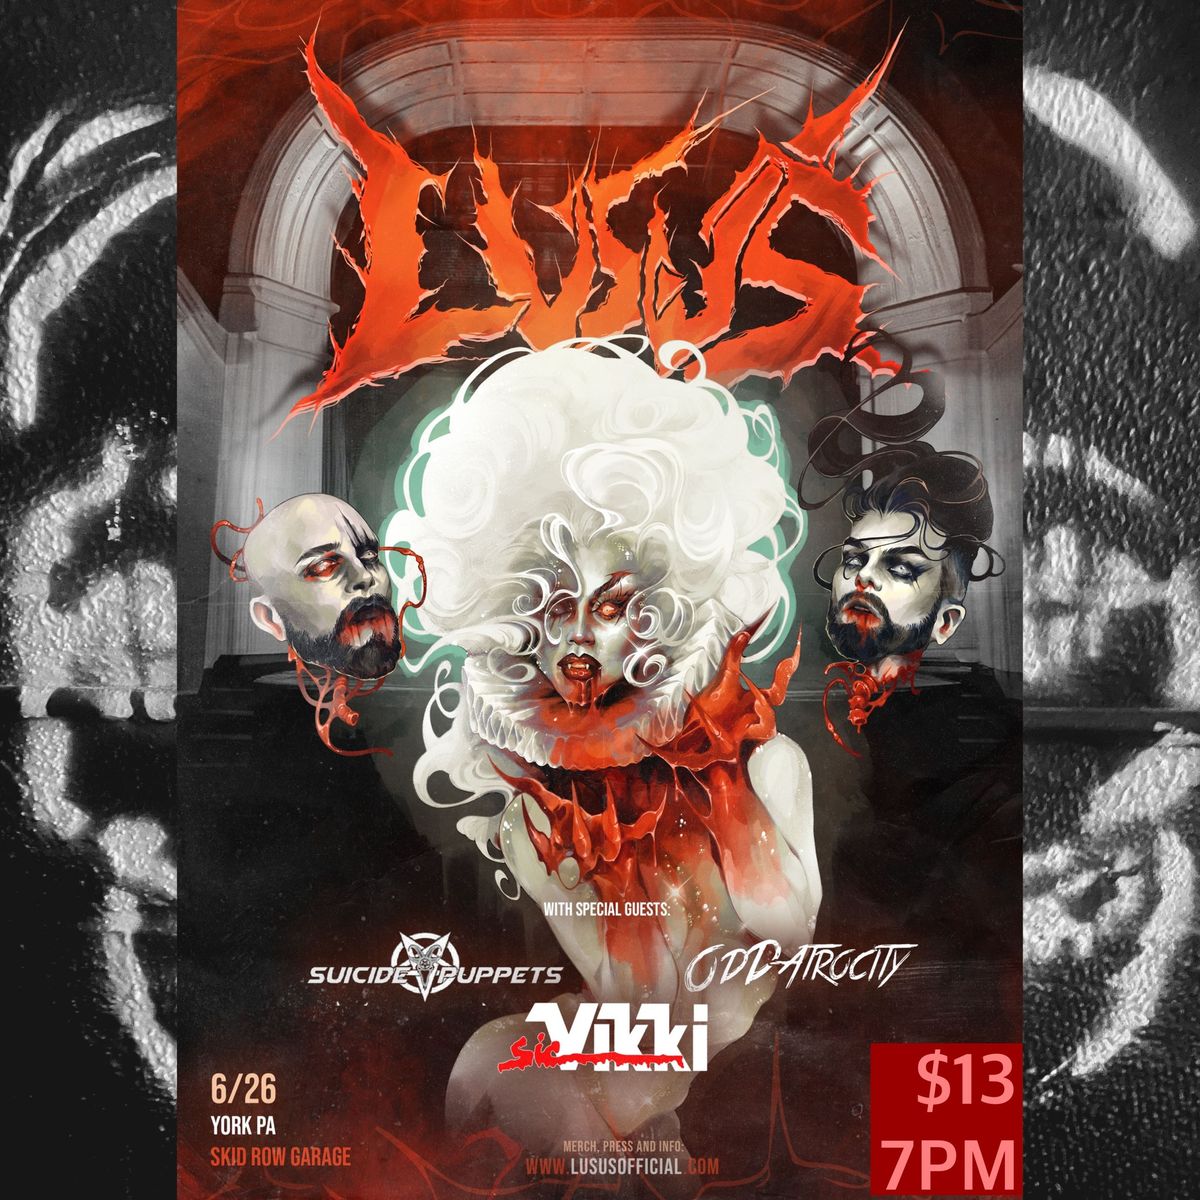 Lusus, Suicide Puppets, Odd Atrocity, & drag performances by Sible Stackhouse & more at SRG